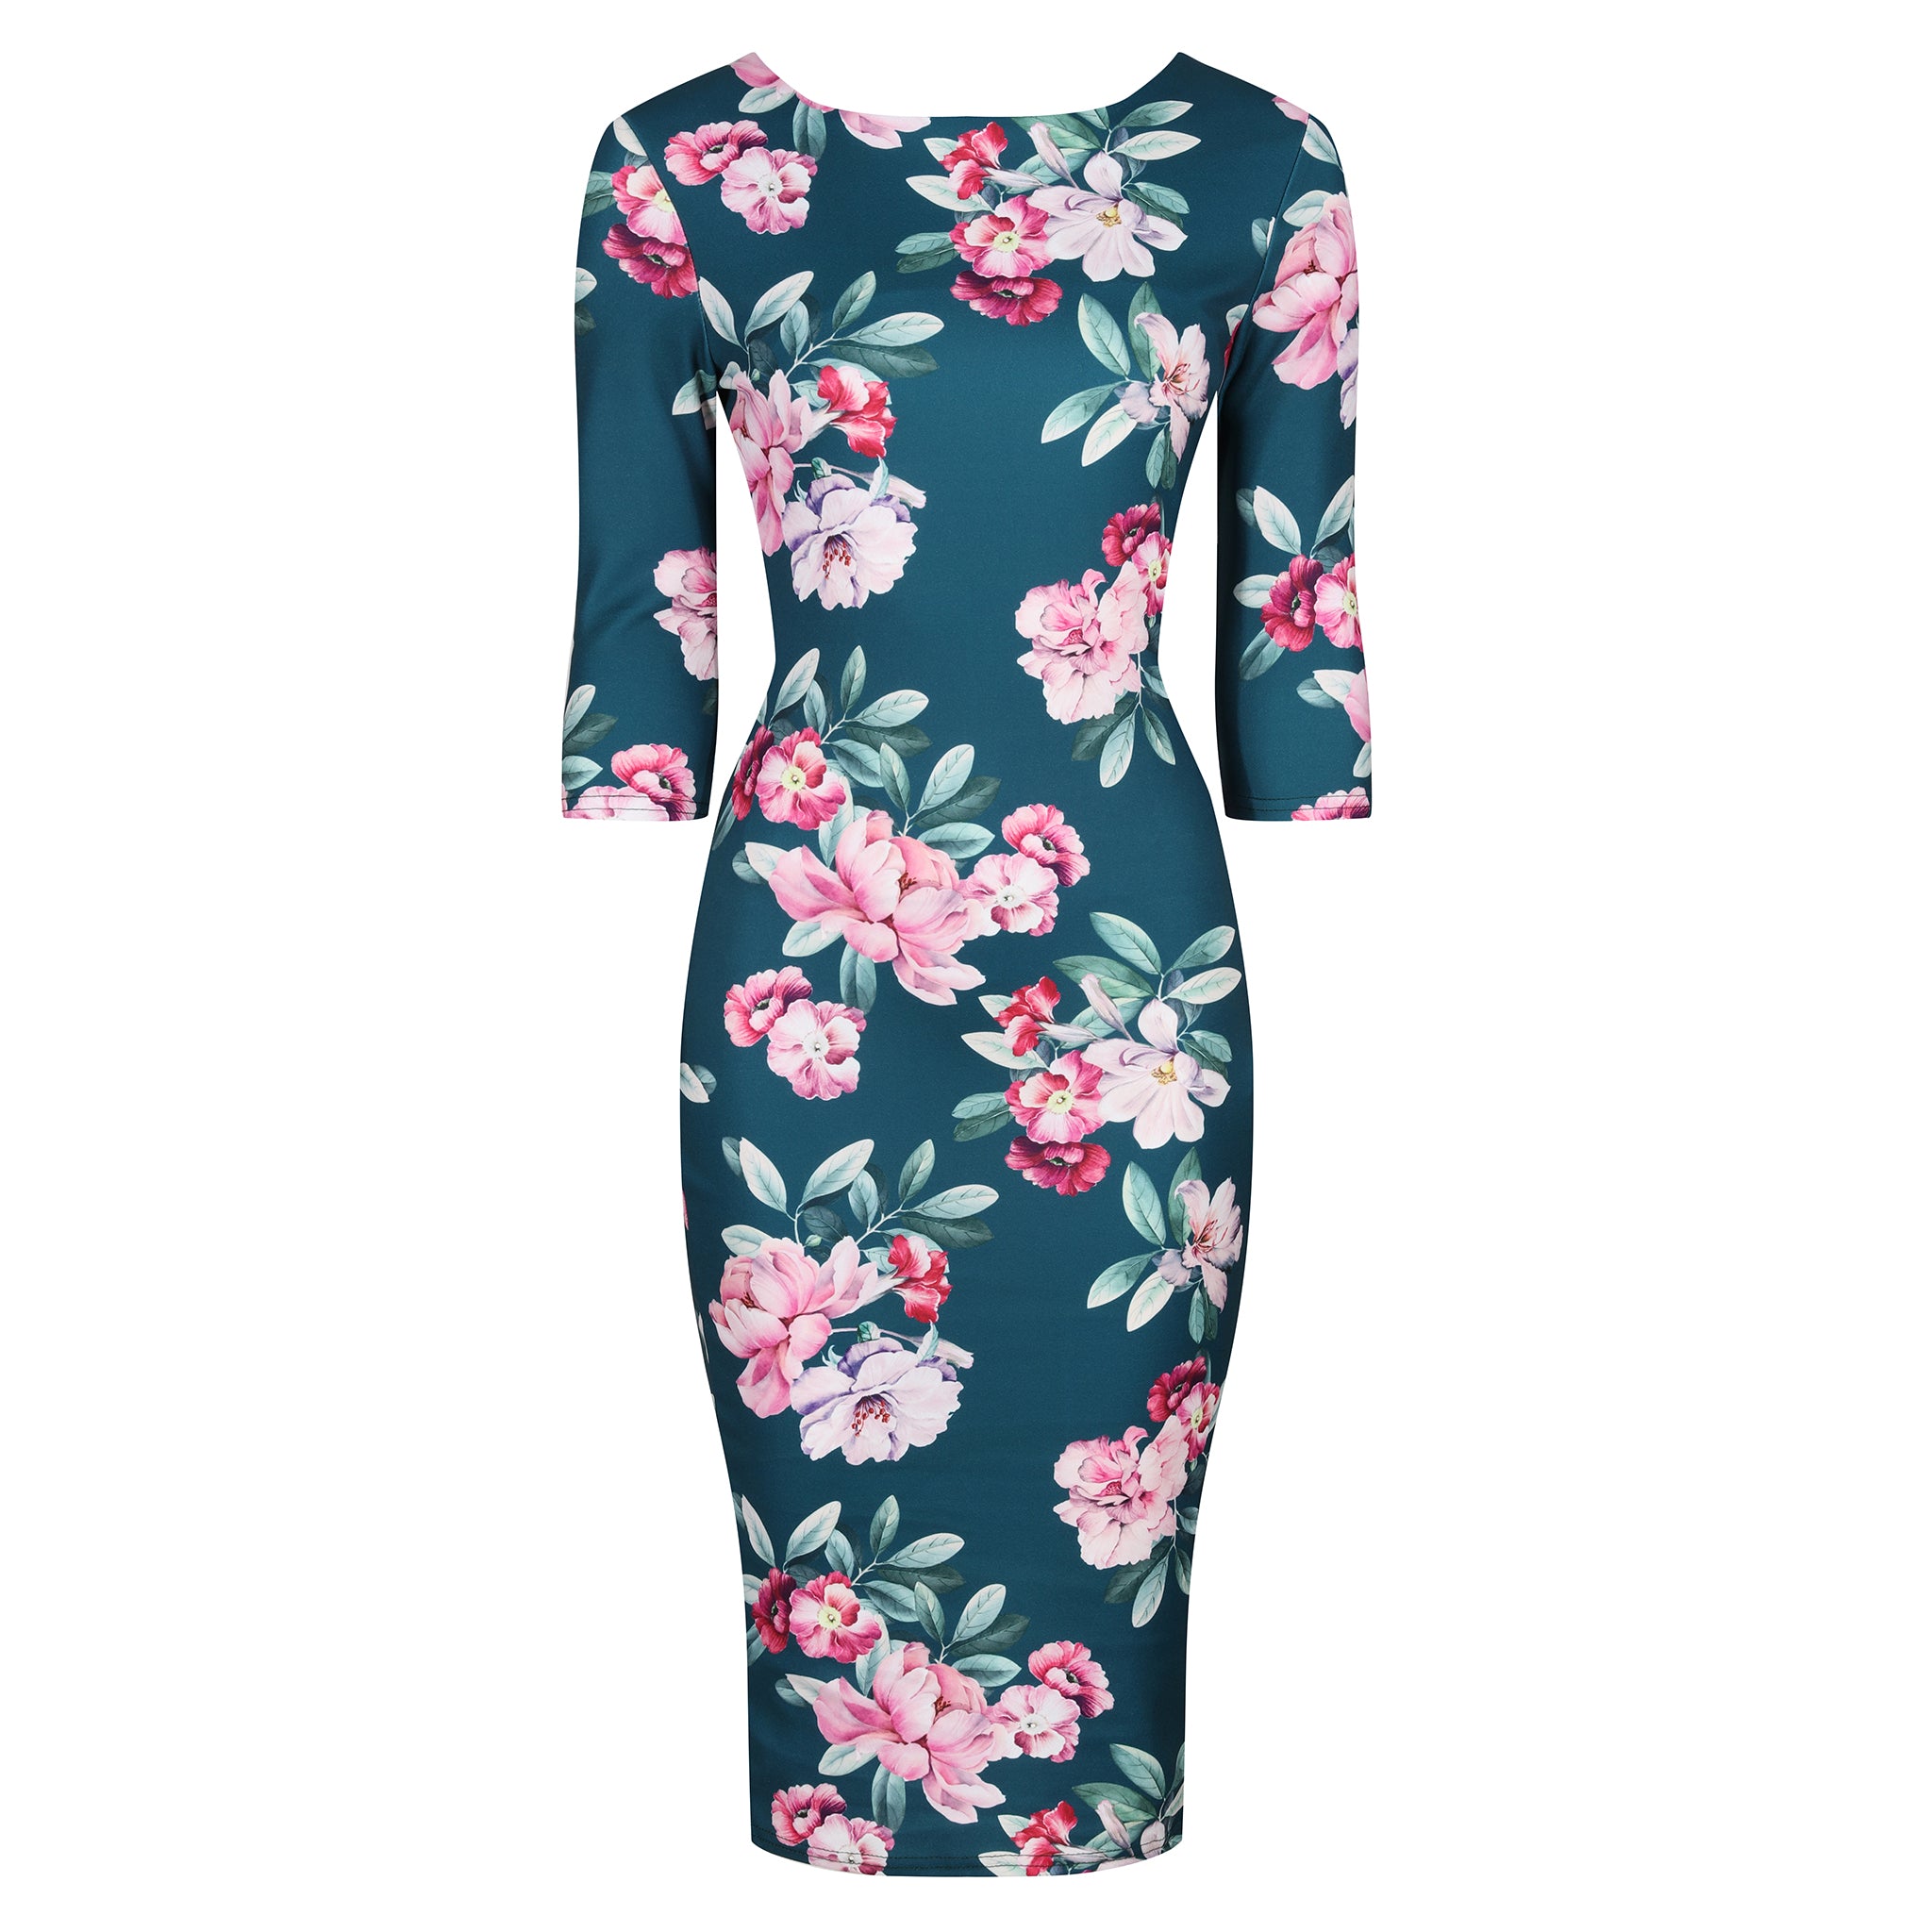 Teal Green and Pink Floral 3/4 Sleeve Bodycon Pencil Wiggle Dress